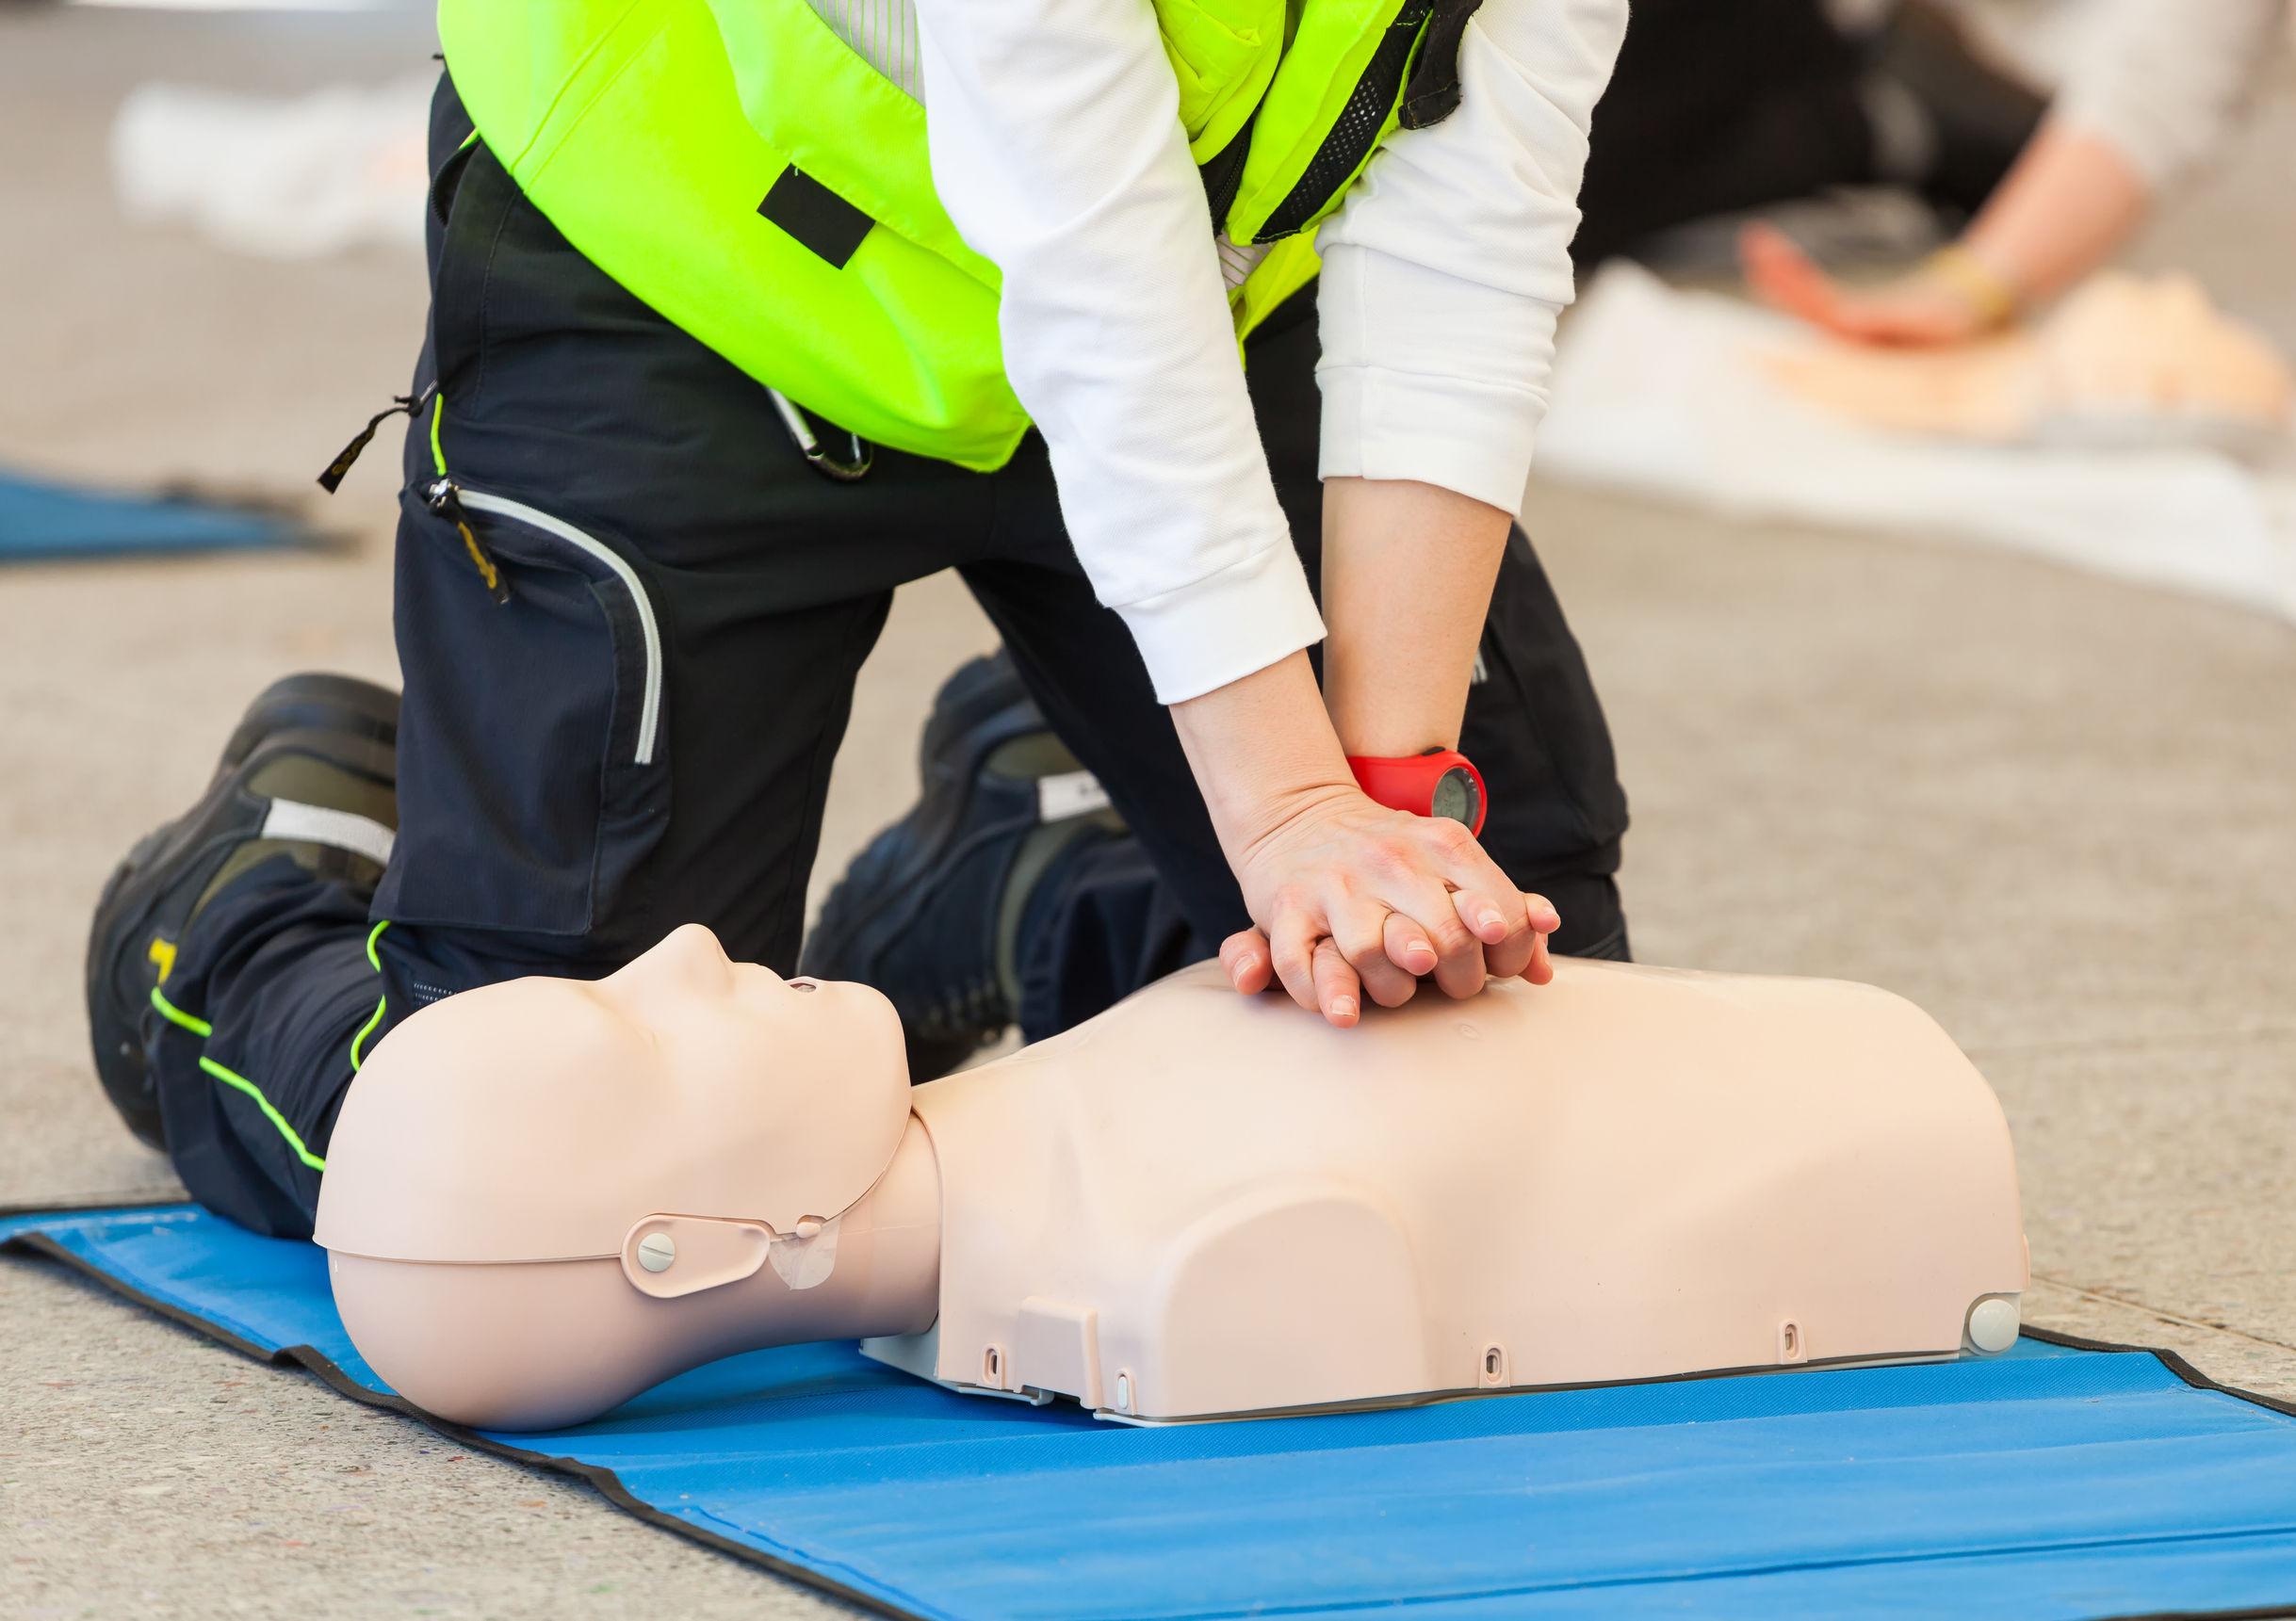 Basic First Aid - St. Bernard's Health and Safety Institute